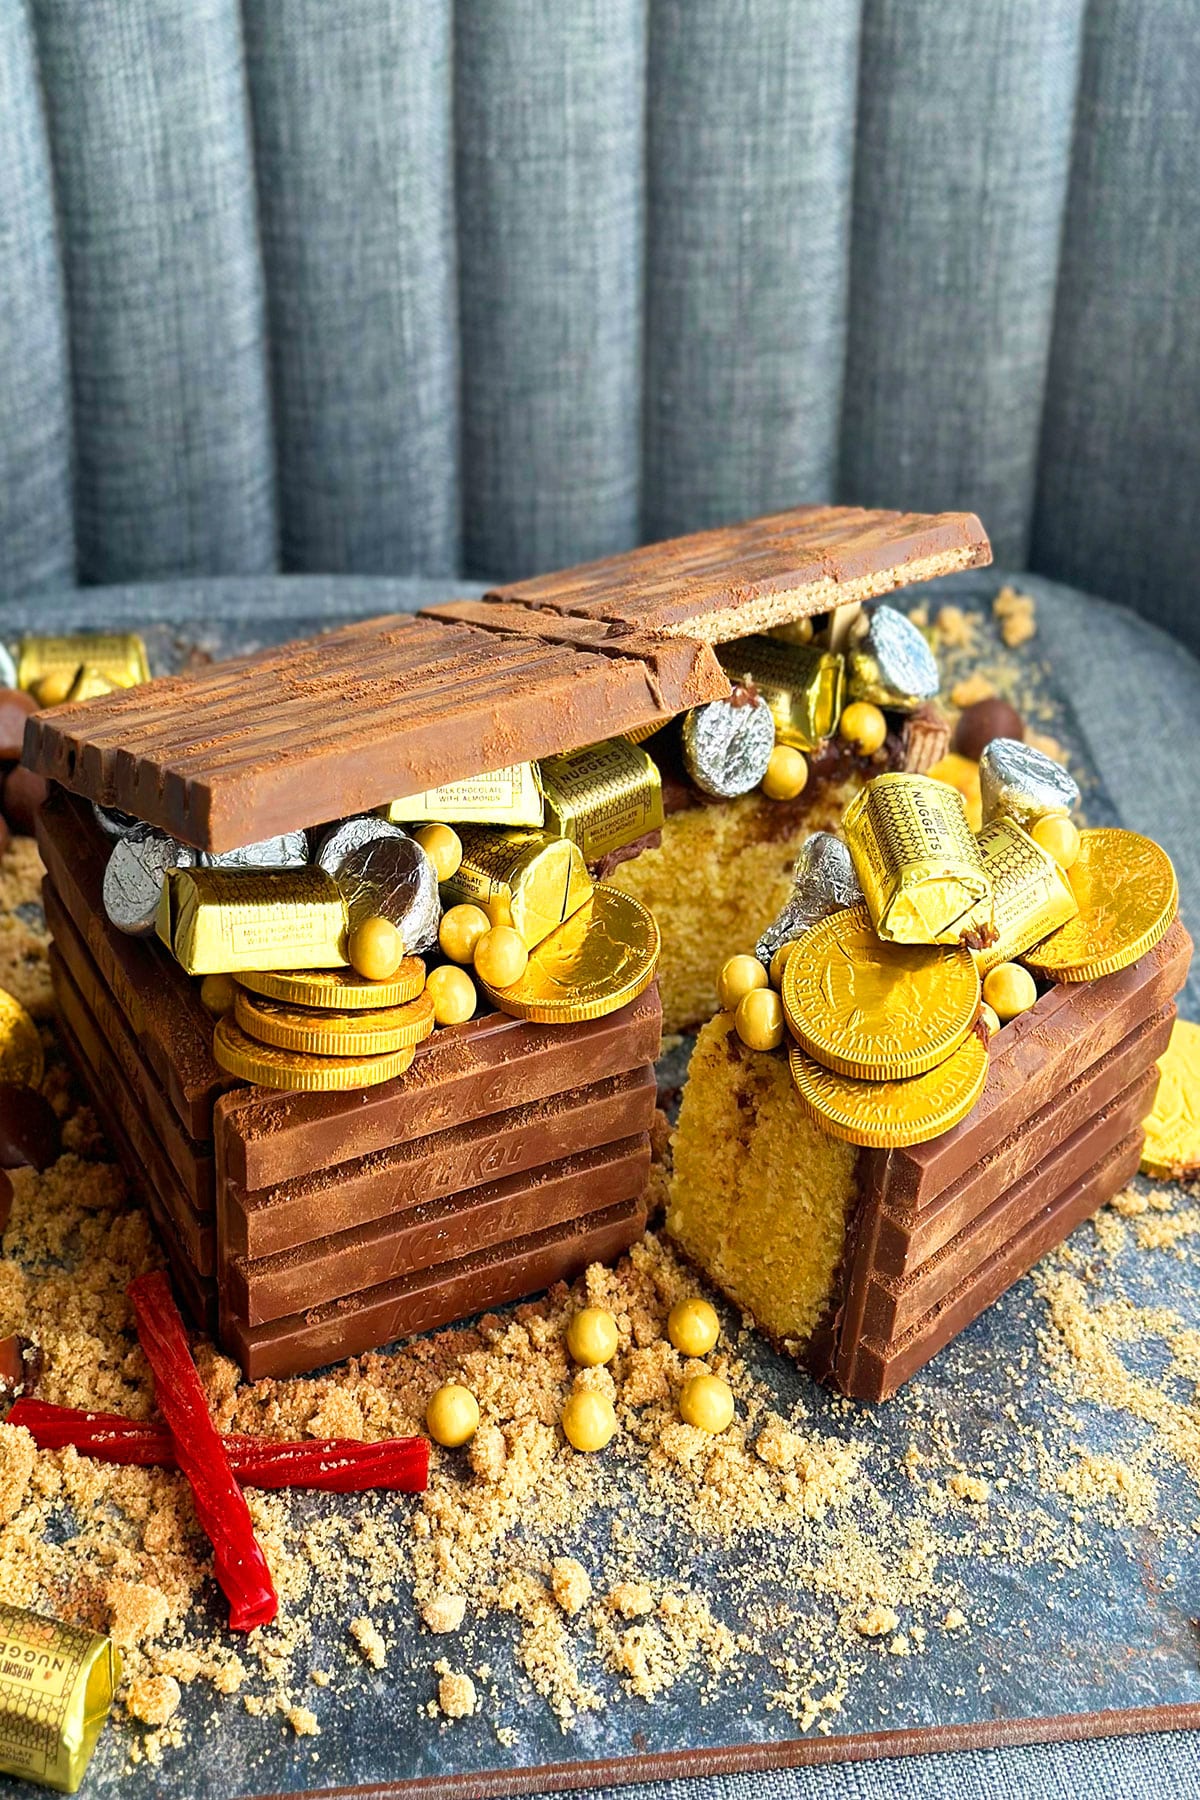 Sliced Pirate Treasure Box Cake Filled With Gold and Silver Candies 